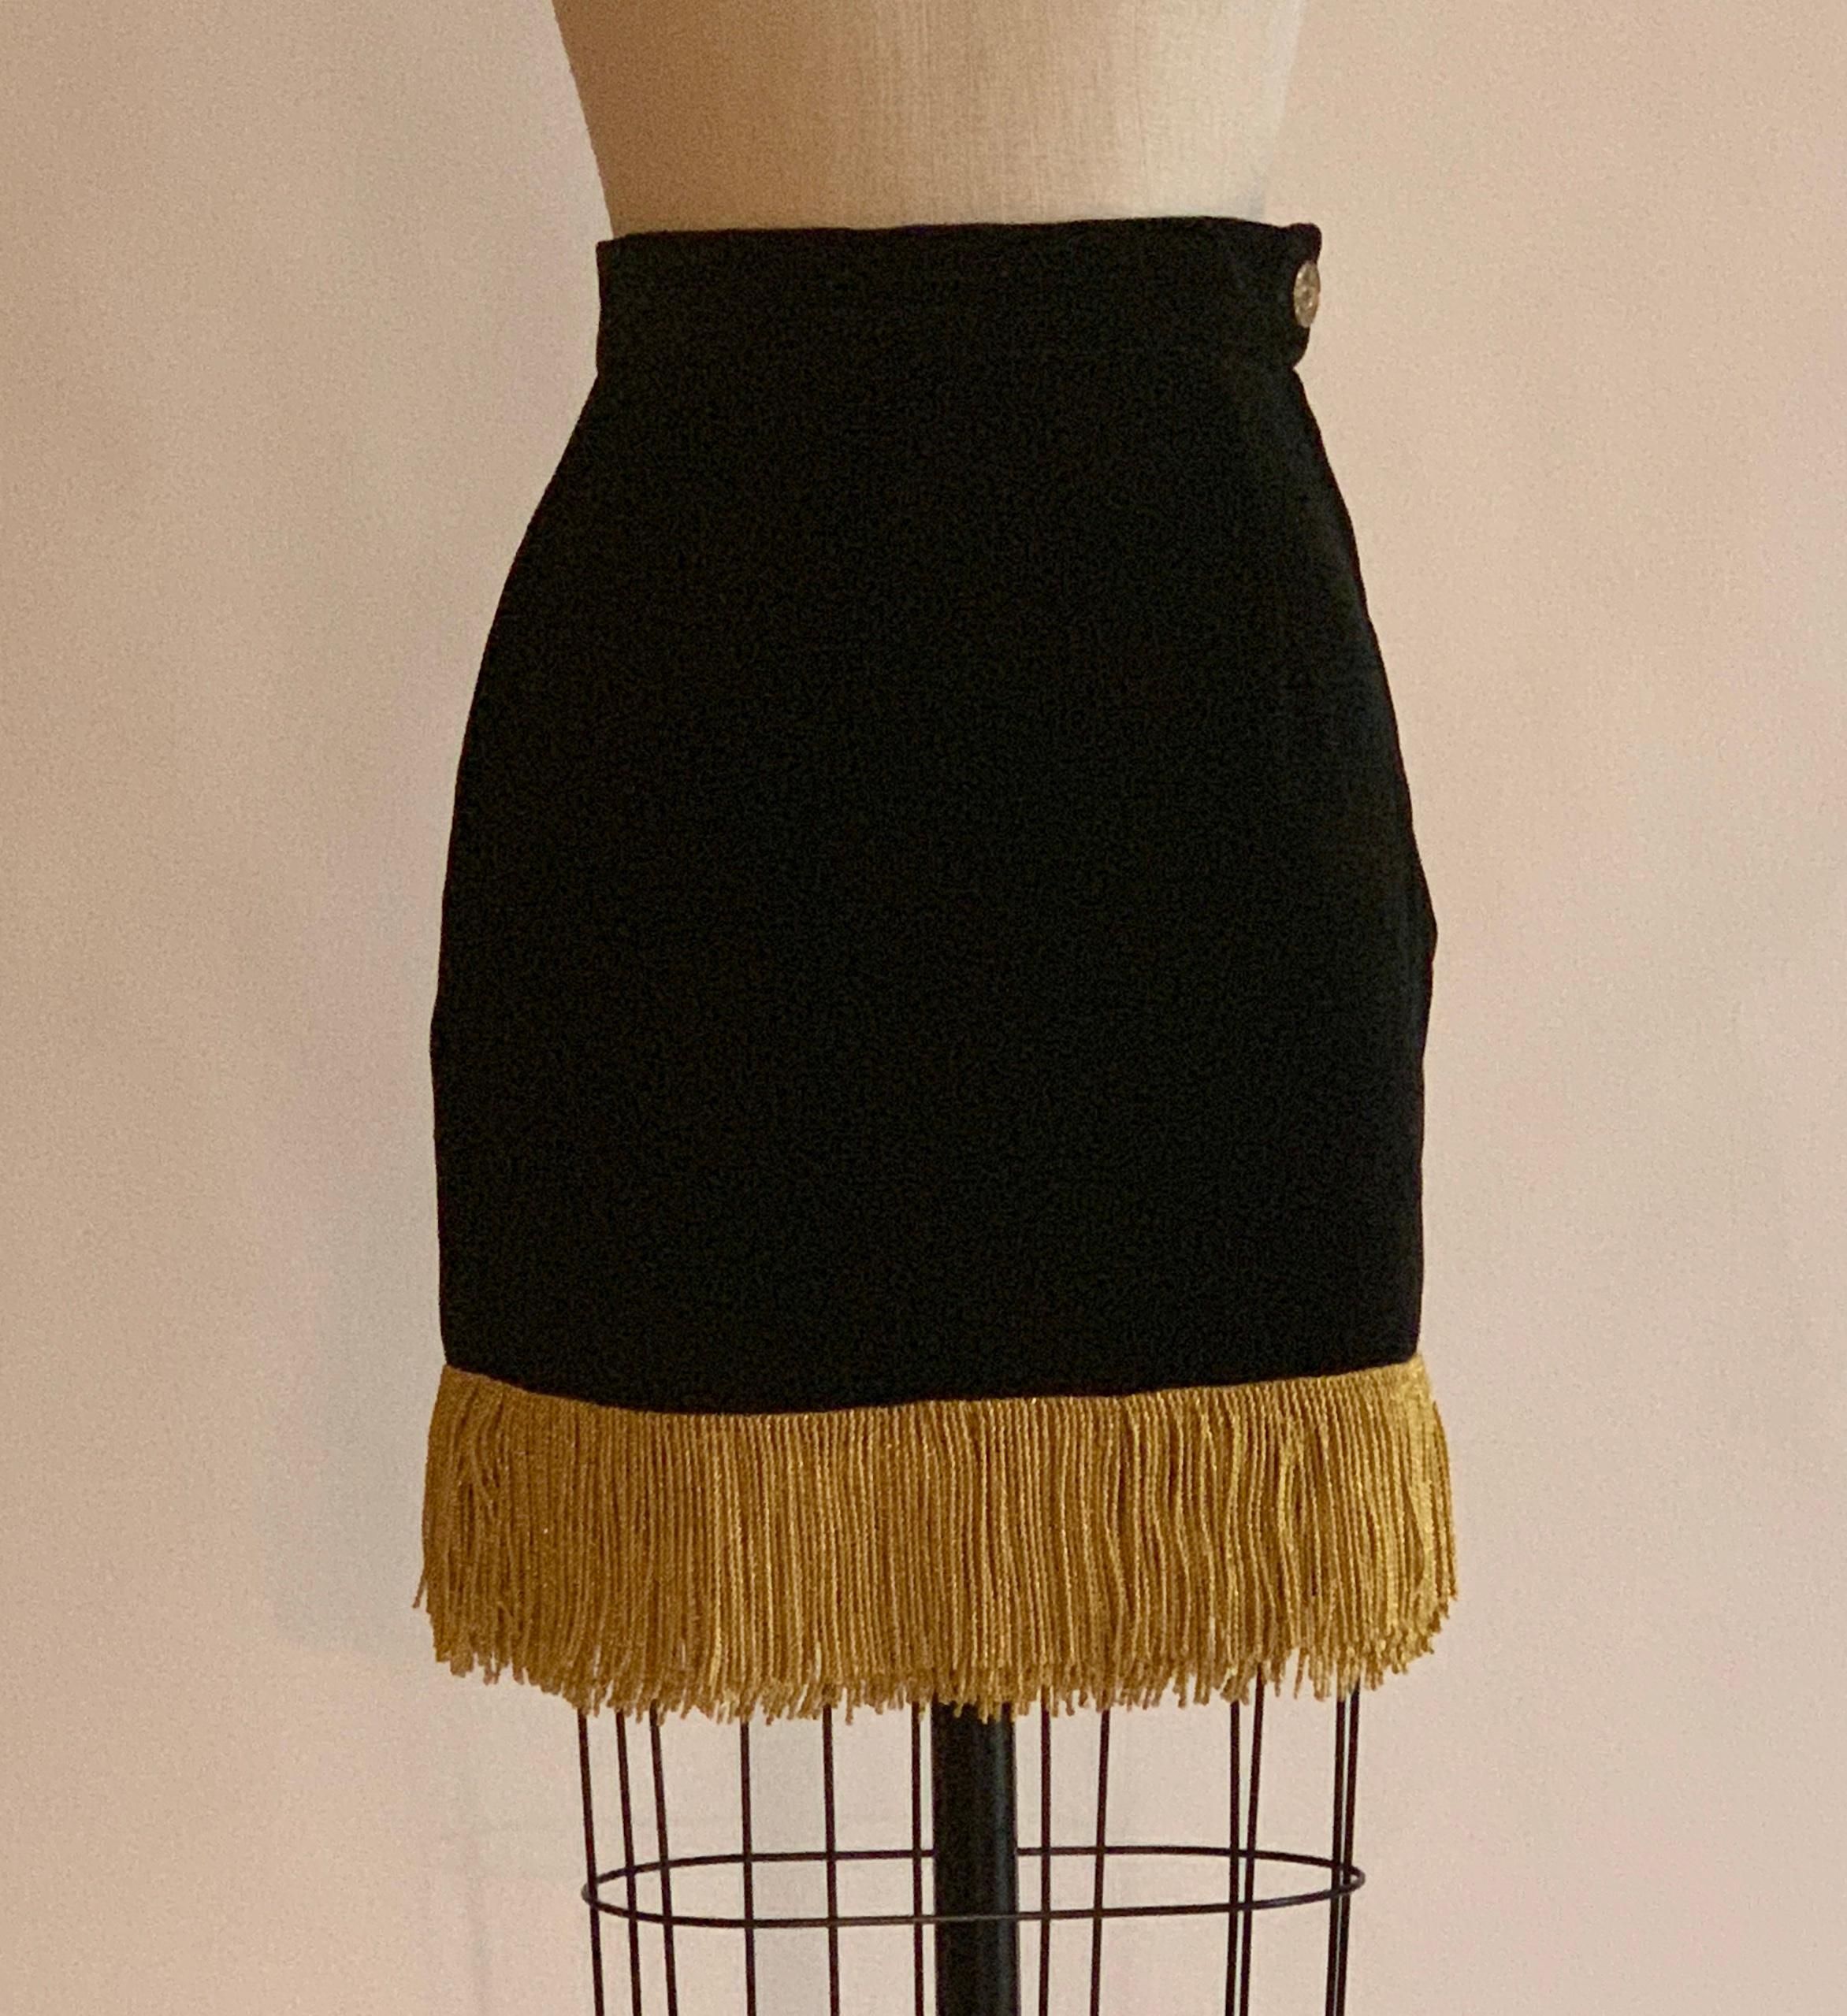 Moschino Cheap & Chic vintage 1990s black velvet pencil skirt with gold fringe trim. Side zip and Cheap & Chic branded gold button at side. 

79% acetate, 21% rayon.

Made in Italy.

Labelled size IT 40, US 6. Best fits a modern 2, see